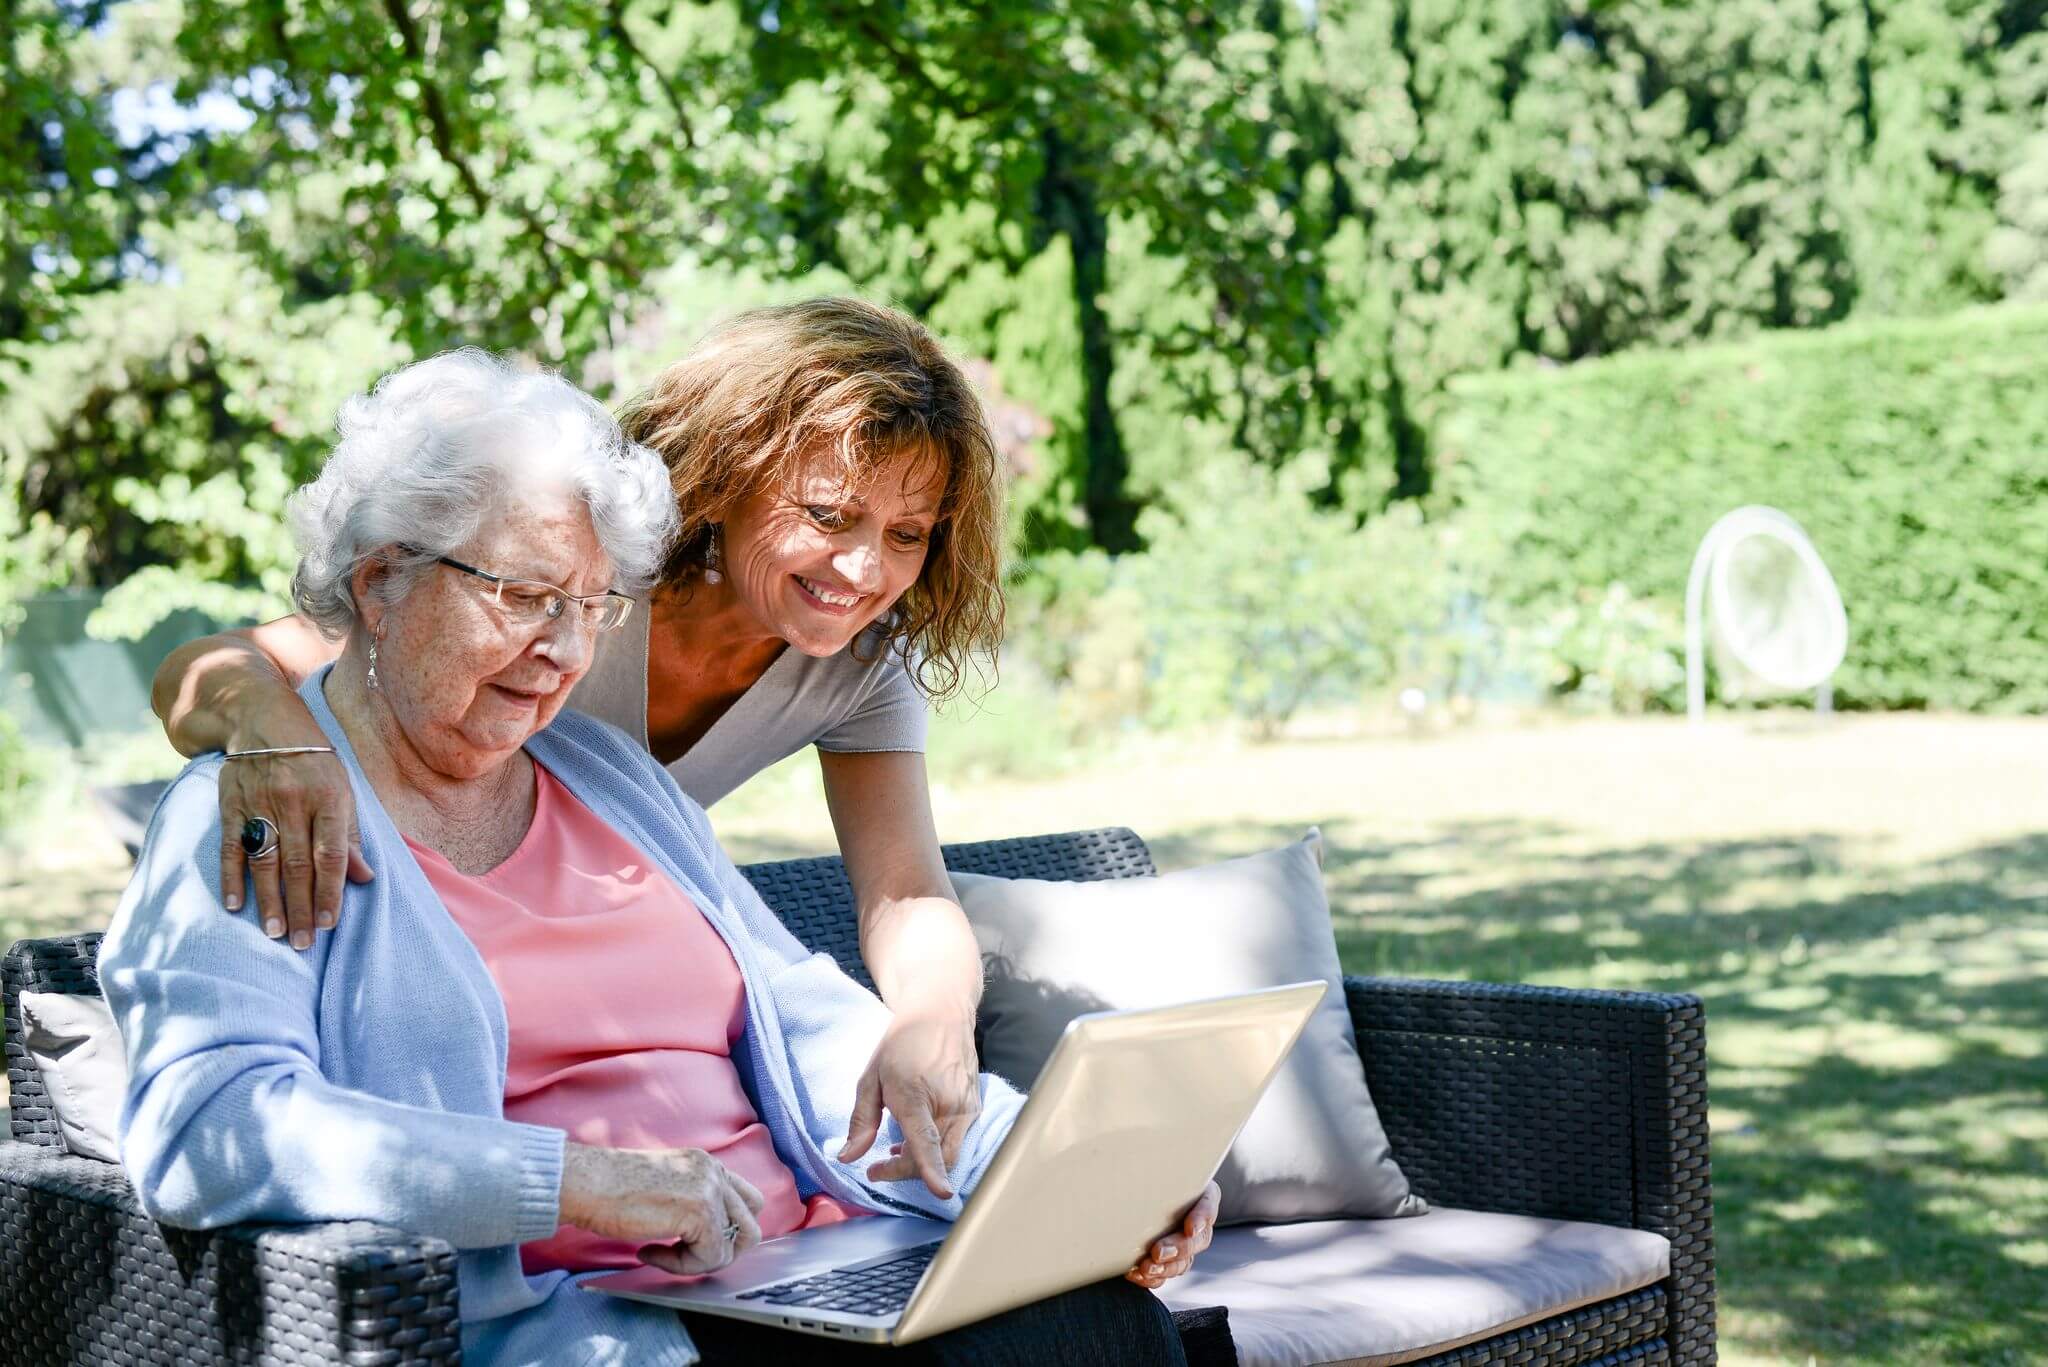 A woman site outside in a couch with a friend who is helping her with a computer